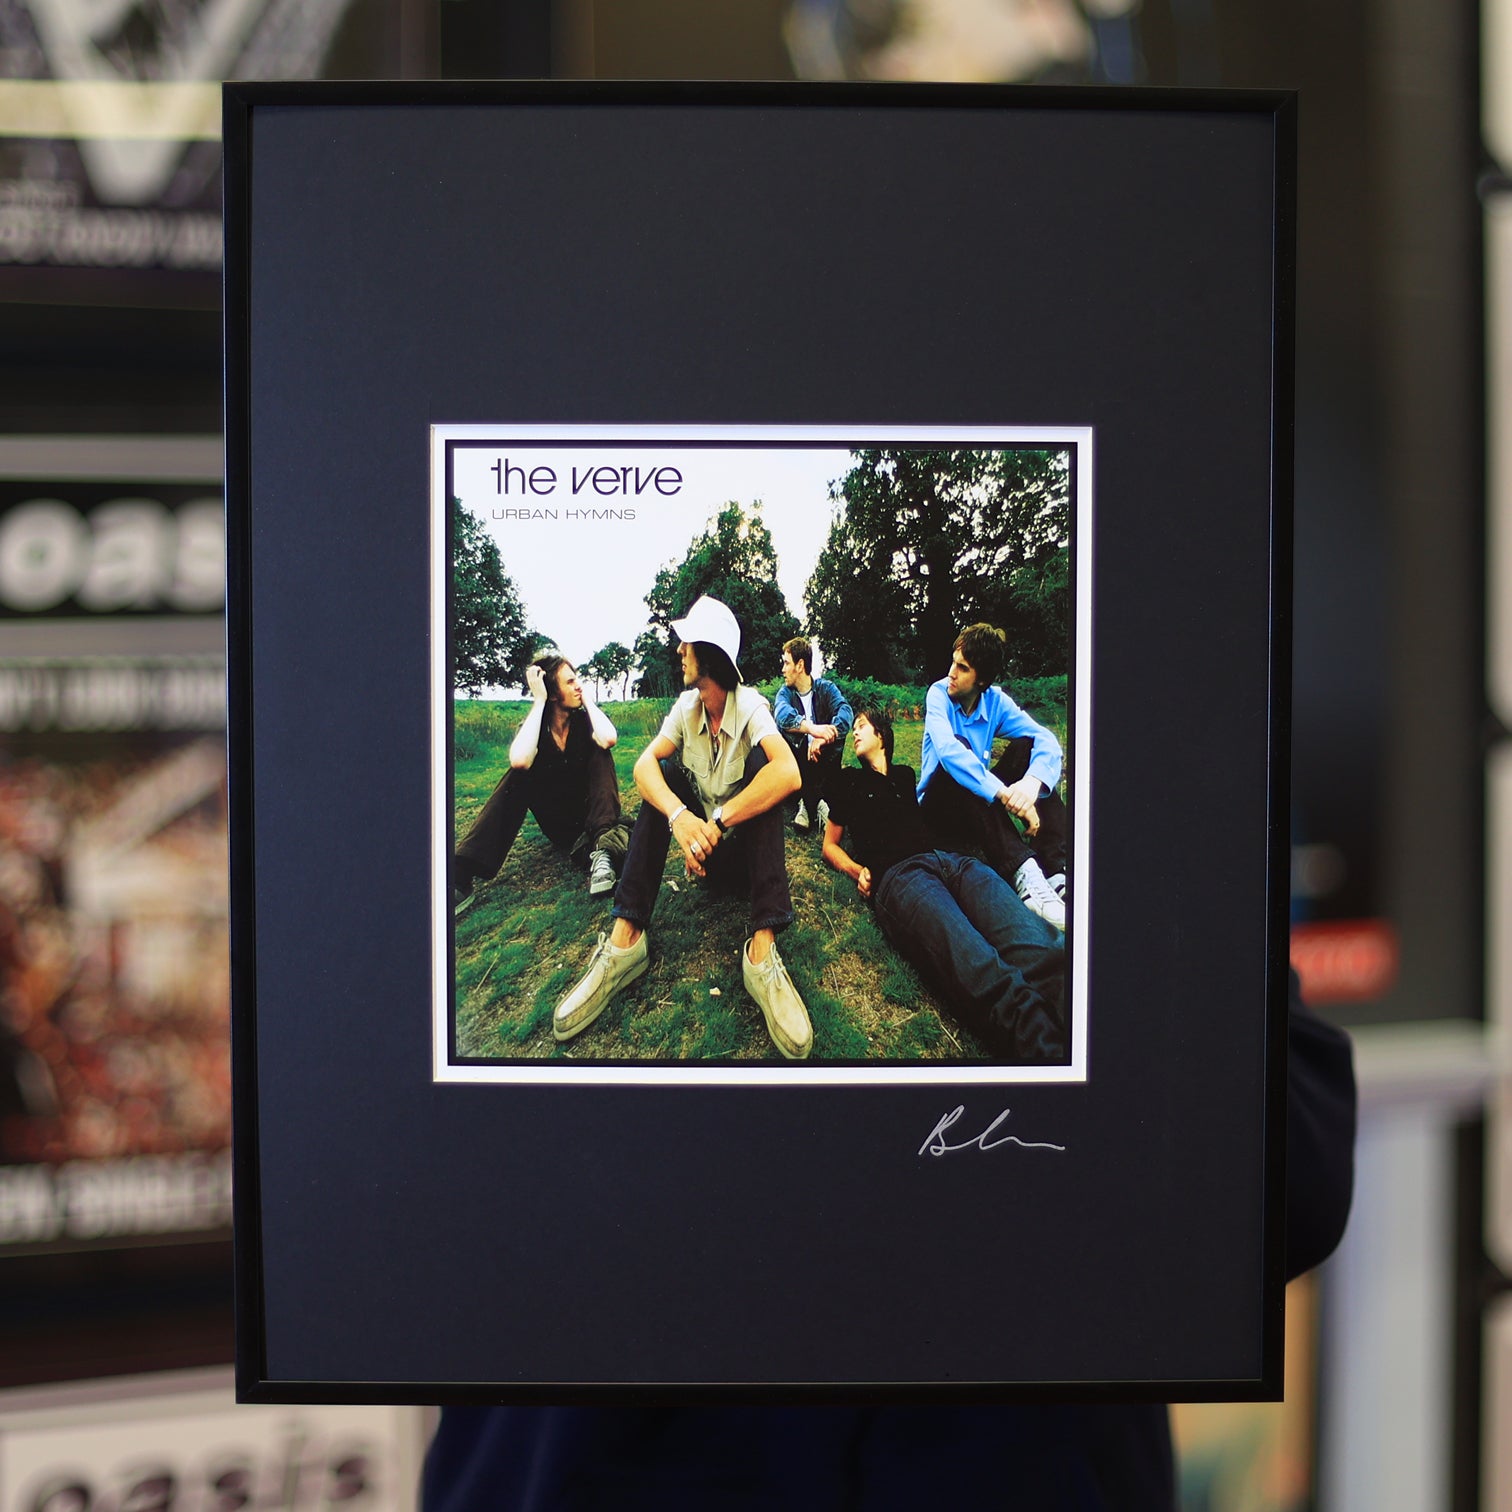 The Verve - Urban Hymns - Framed Printers Proof - New Item